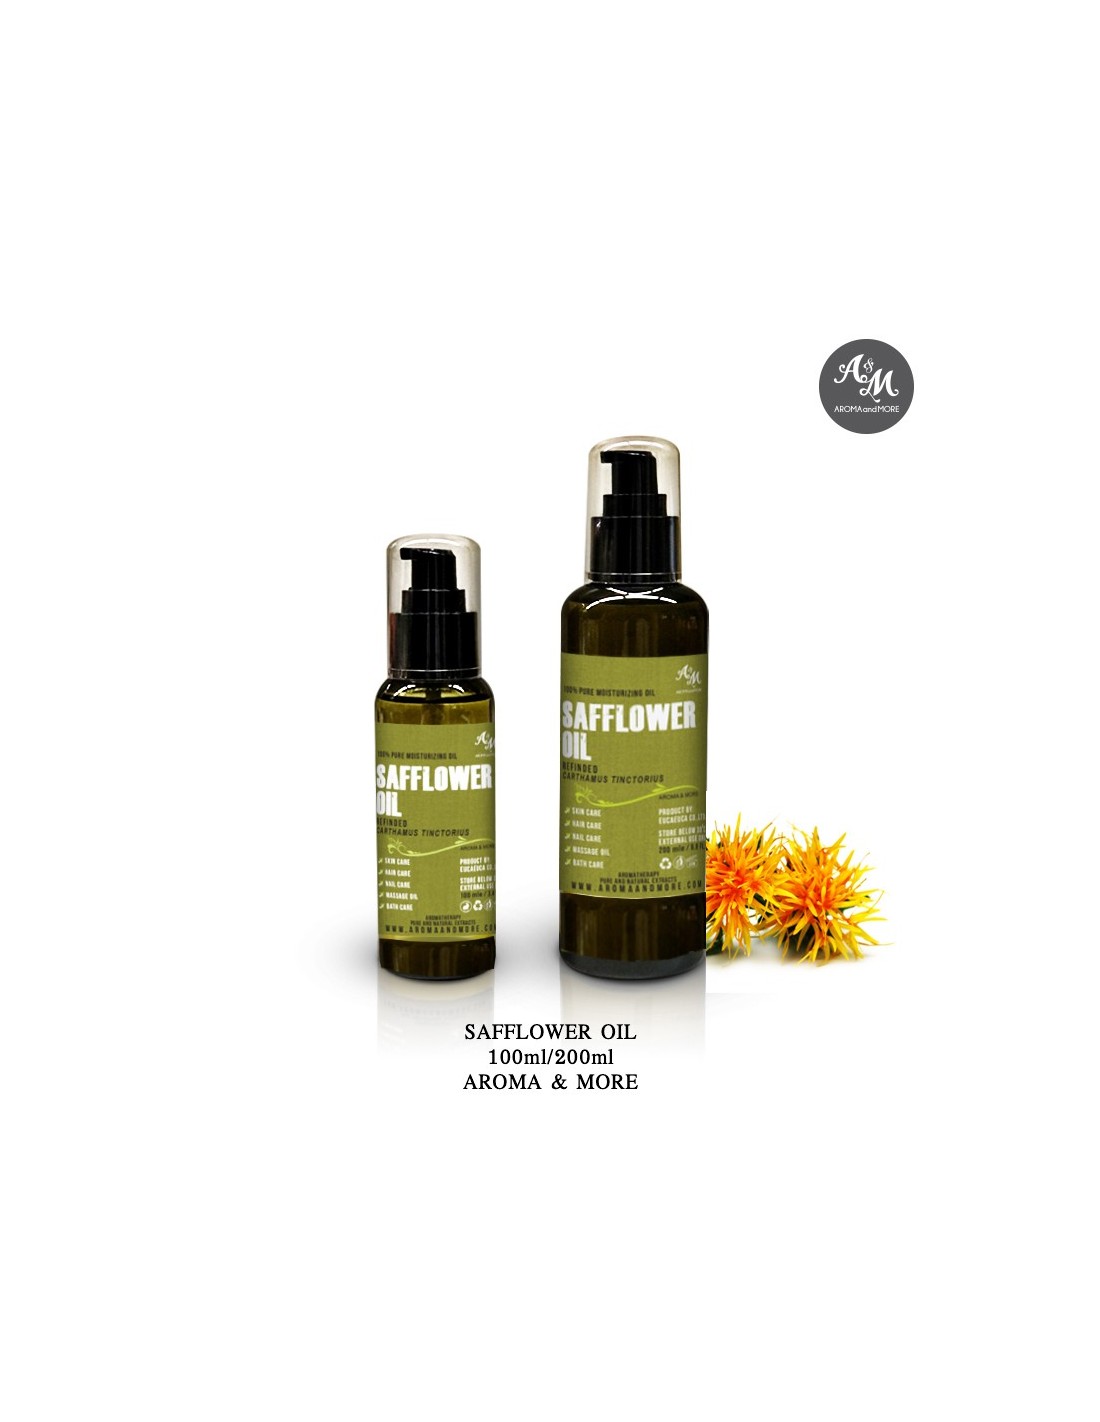 100% Pure High Oleic Safflower Oil, Aromatherapy Carrier Oil